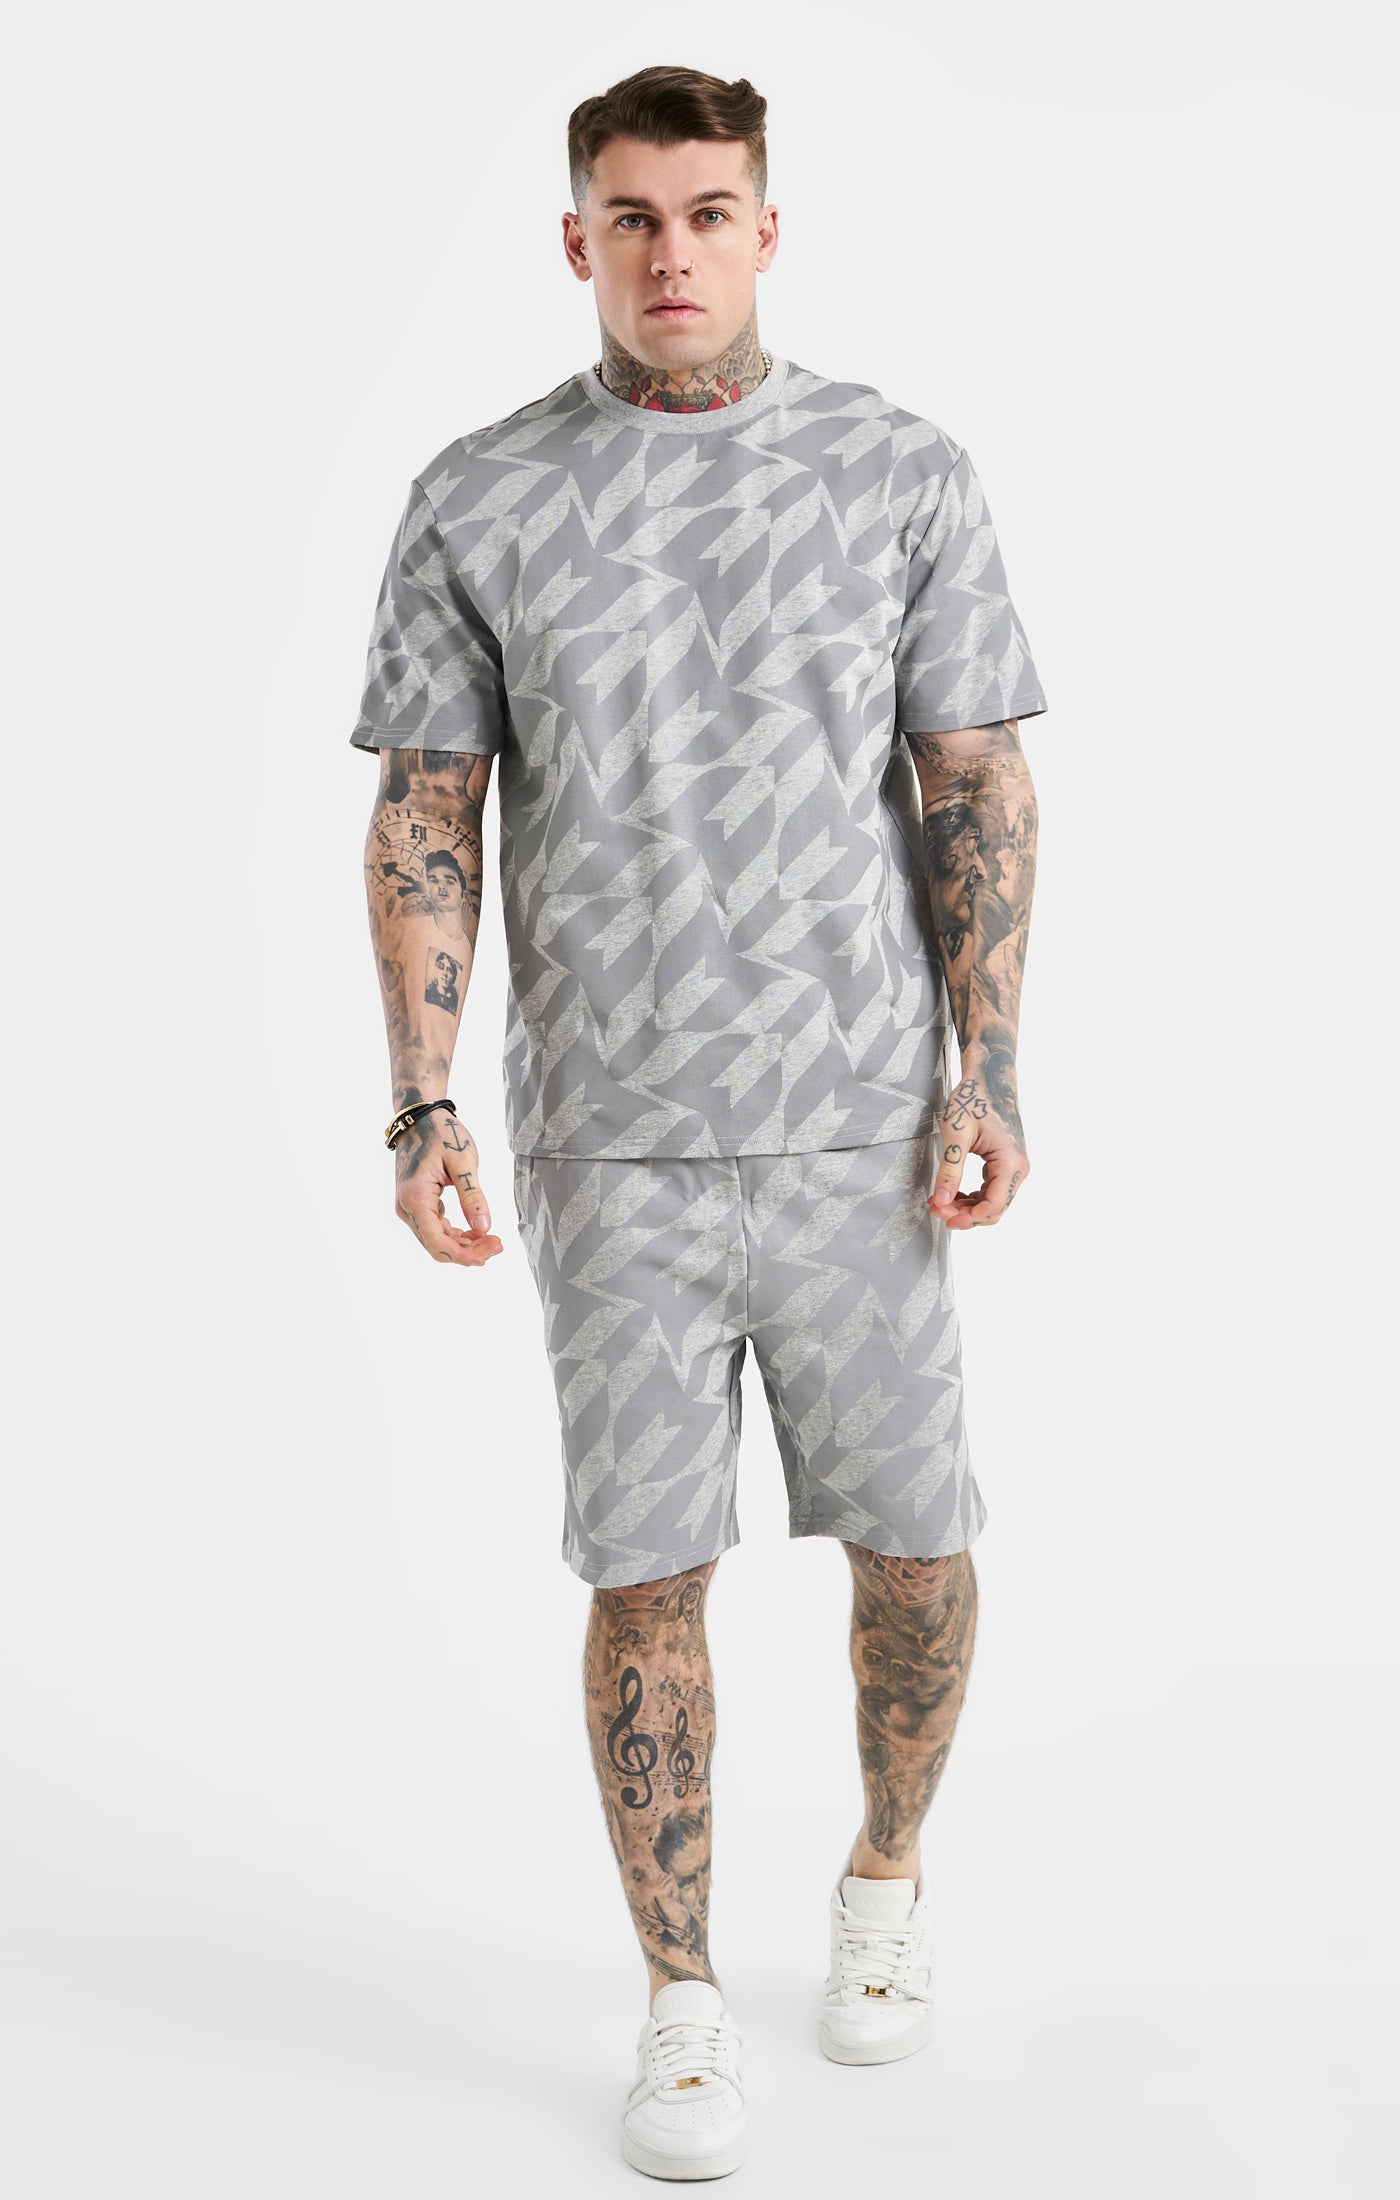 Load image into Gallery viewer, Messi x SikSilk Silver Print Tee - Grey Marl (2)